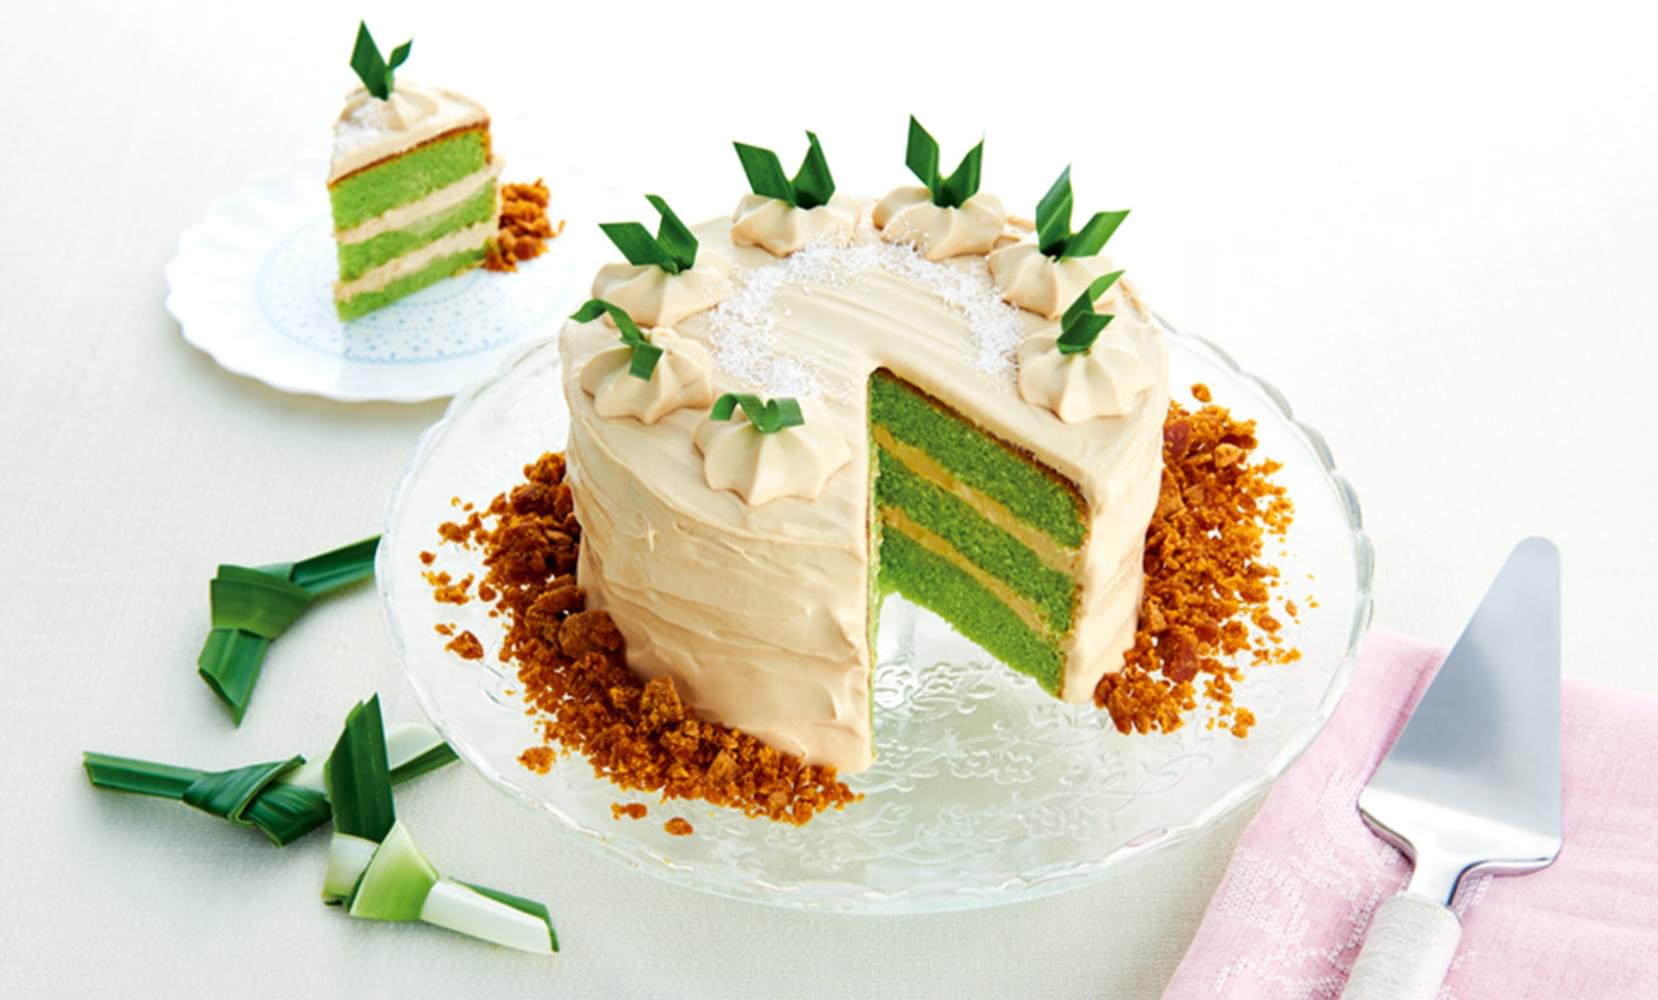 How To Make Soft and Fluffy Pandan Chiffon Cake (Complete Guide)